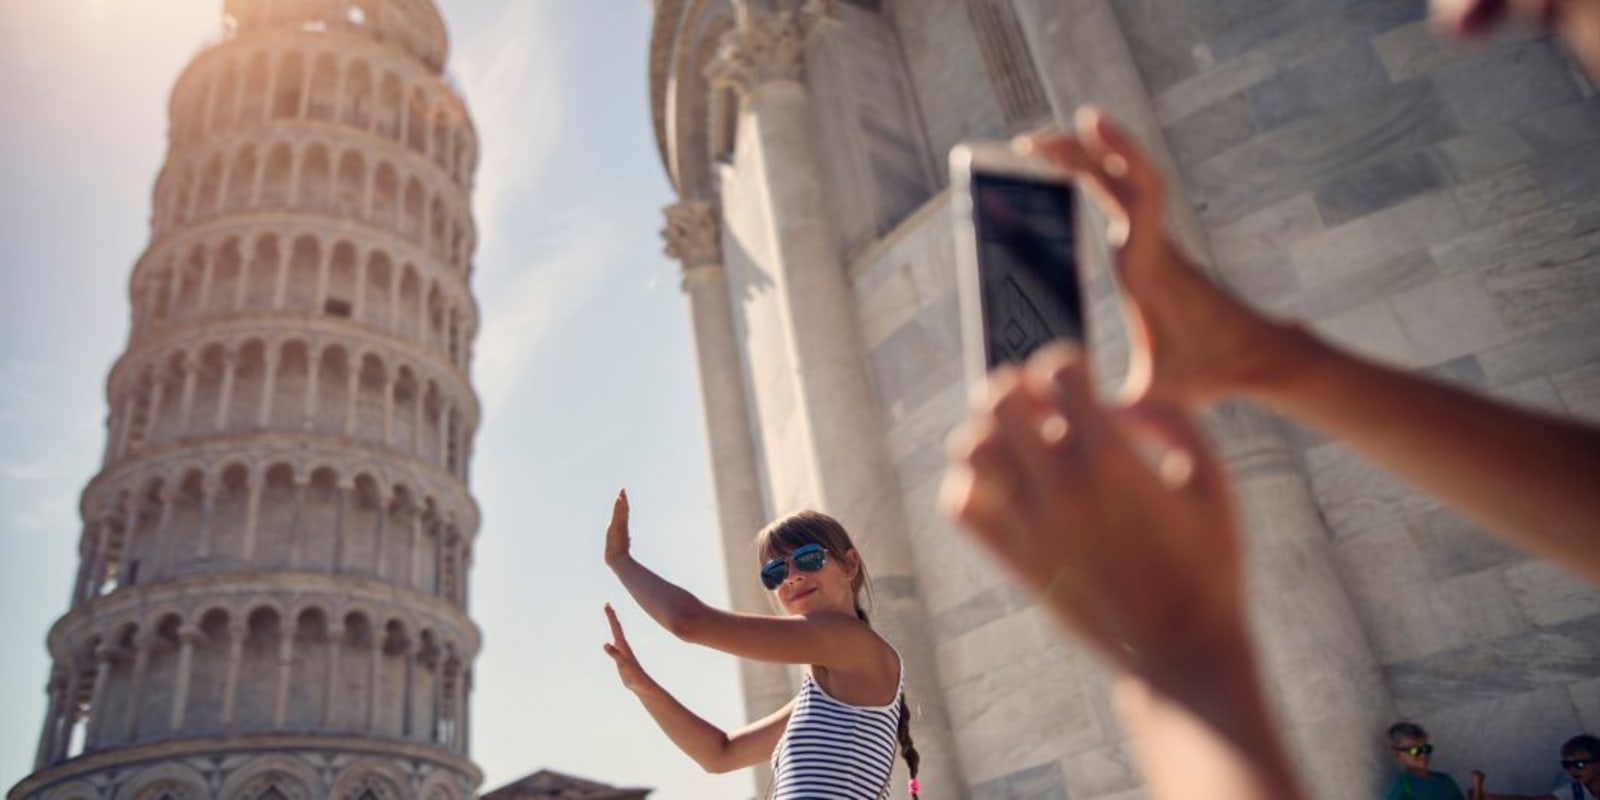 A person using their phone to take a photo of someone pretending to hold up the leaning tower of Pisa